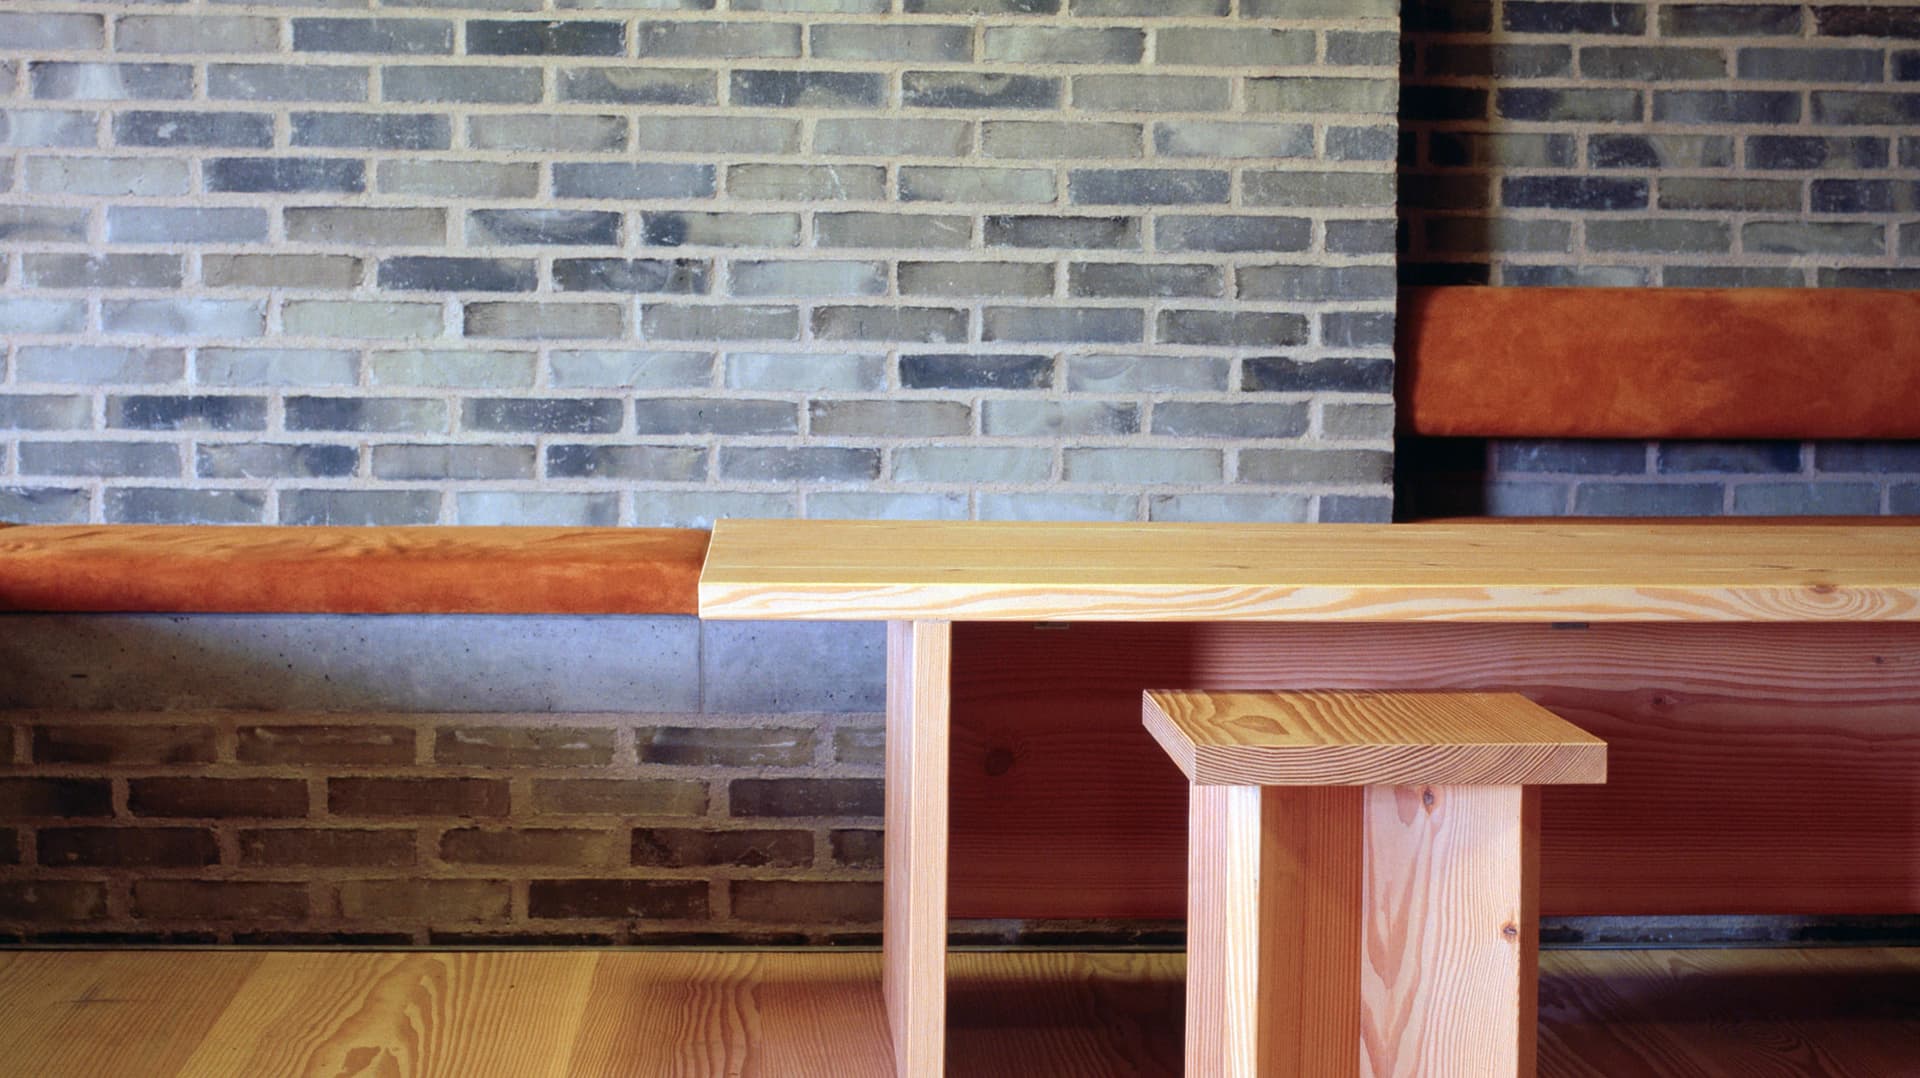 Build-in benches made from suede and wooden furniture are all part of the interior.